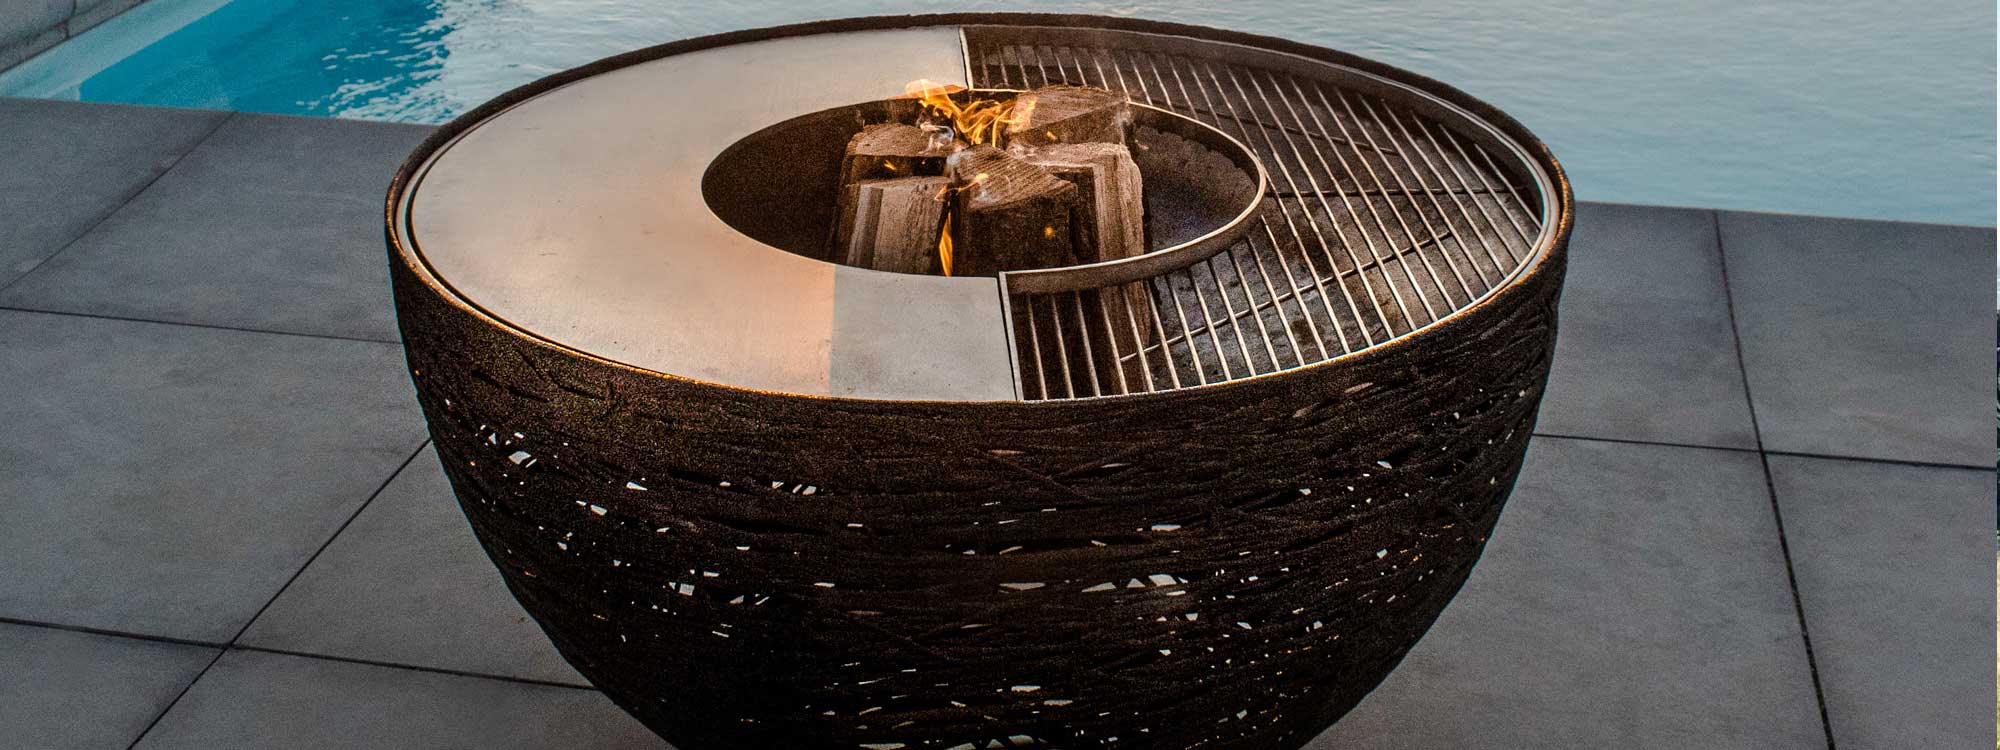 Lava Nest fire pit & modern BBQ is a chic garden fire basket in luxury fire bowl materials by Unknown Nordic basalt garden furniture company.